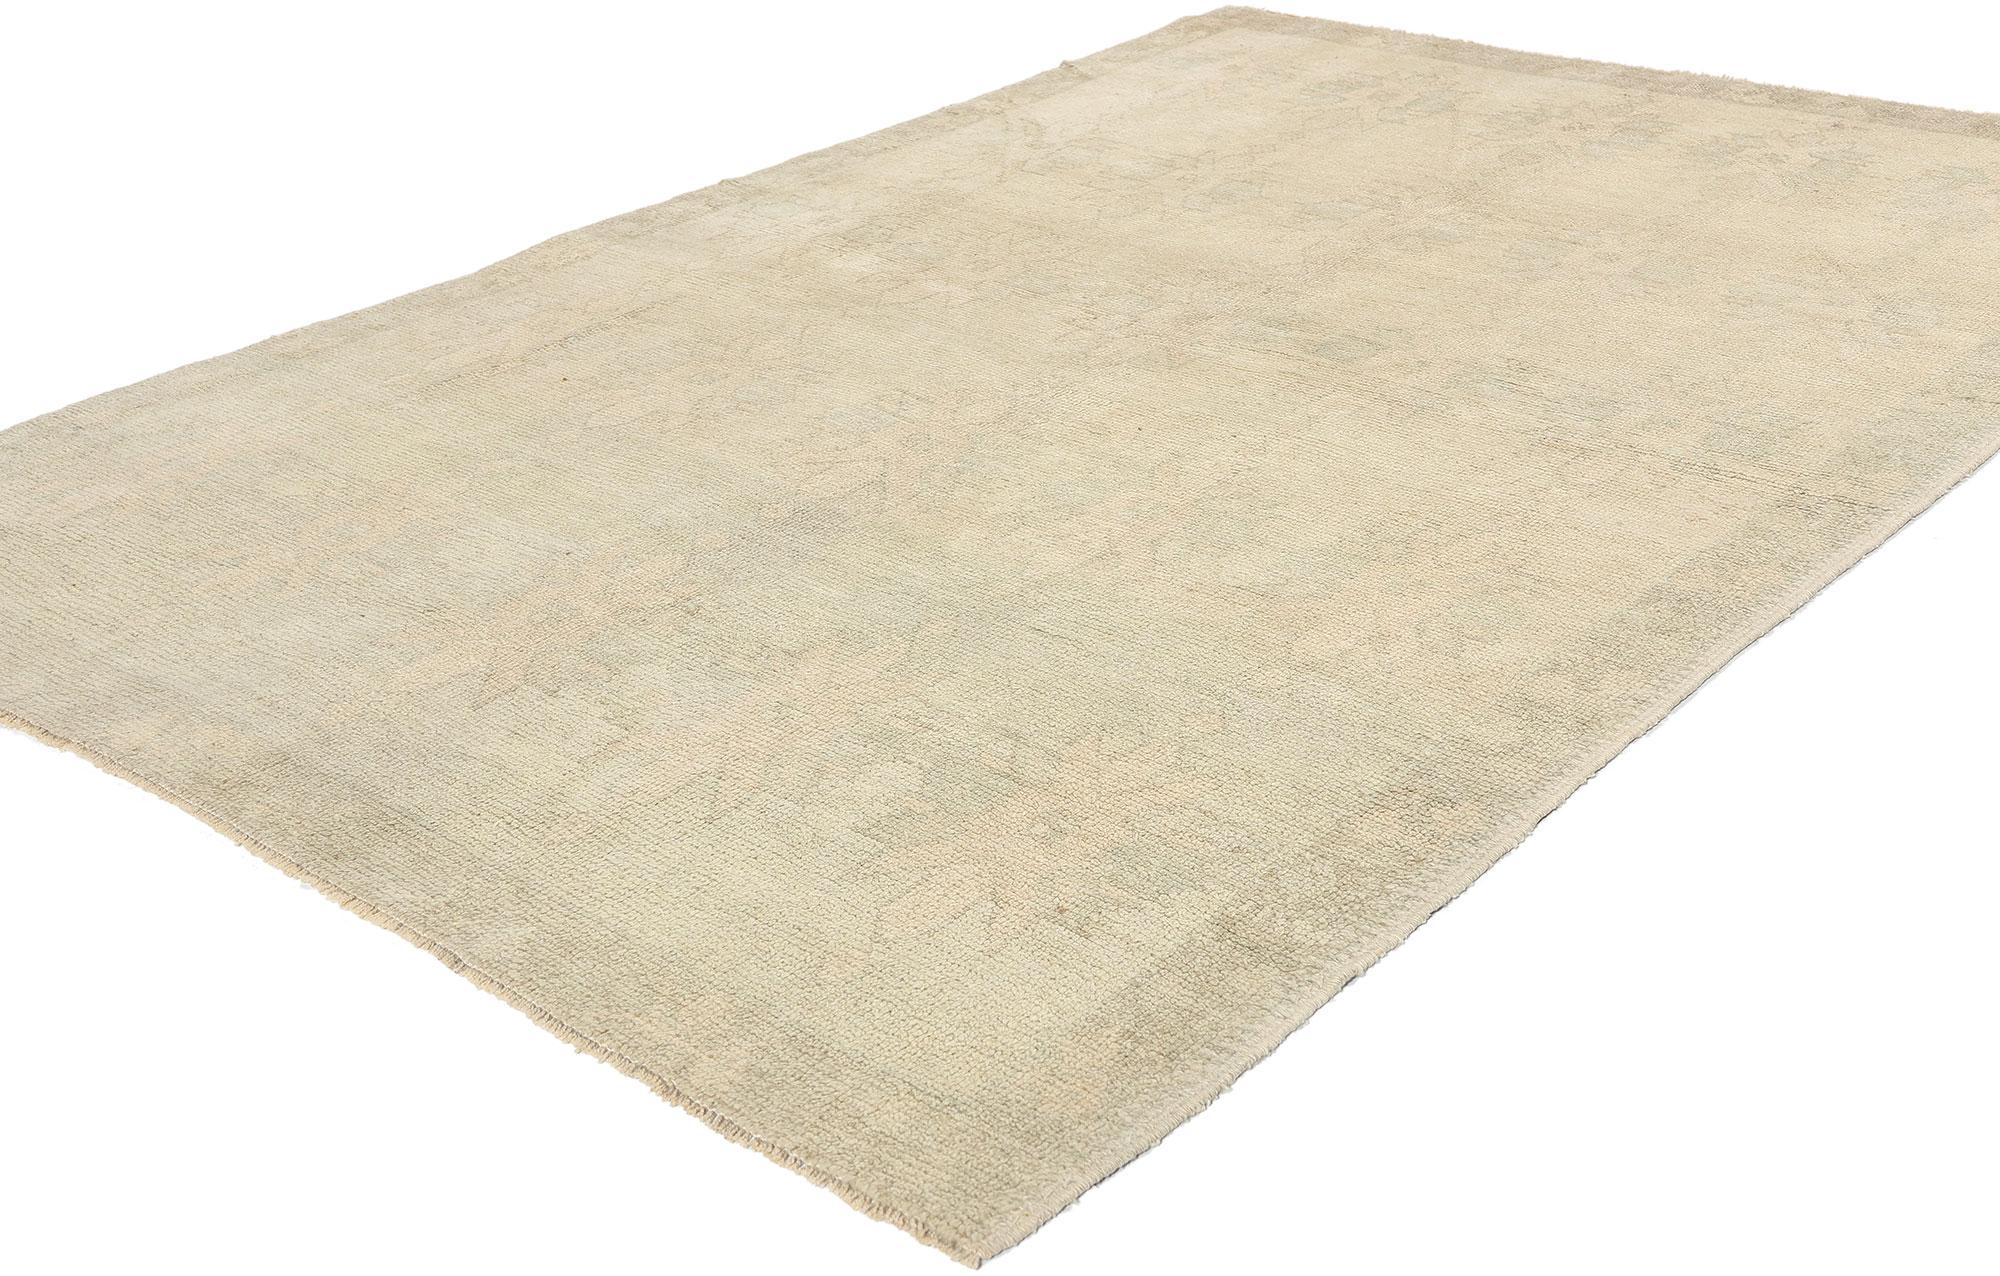 53619 Vintage Muted Turkish Oushak Rug, 04'08 x 07'00. Antique-washed Turkish Oushak rugs with subdued colors are Oushak rugs that have undergone a specialized washing process without altering the texture or integrity of the pile. This washing